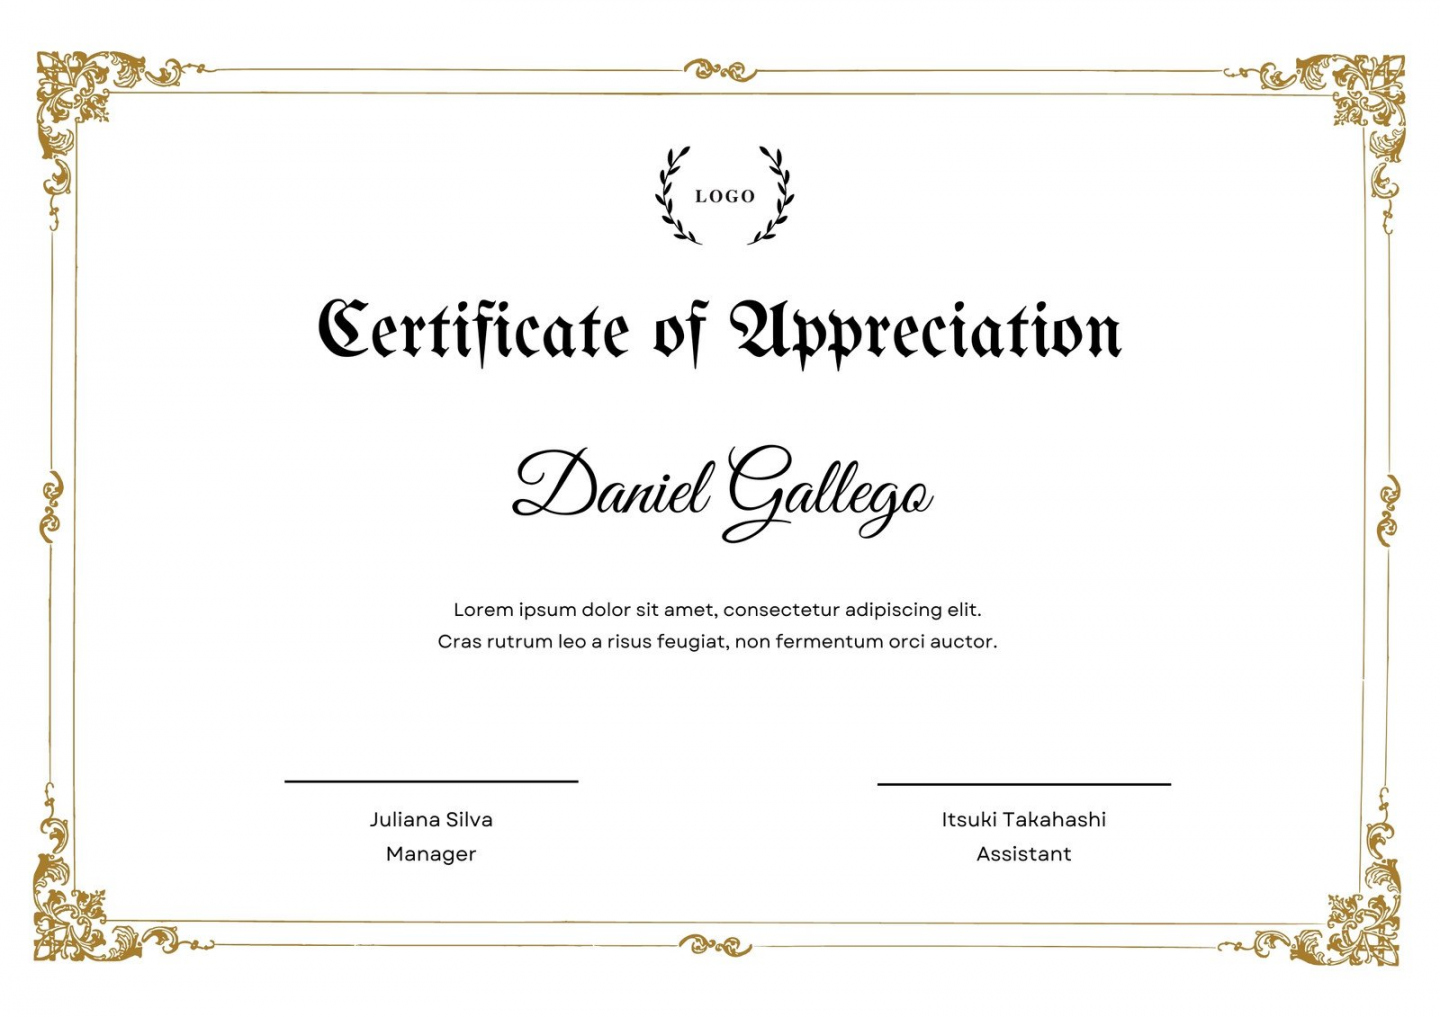 Free Printable Certificates And Awards - Printable - Free, printable, and customizable award certificate templates  Canva